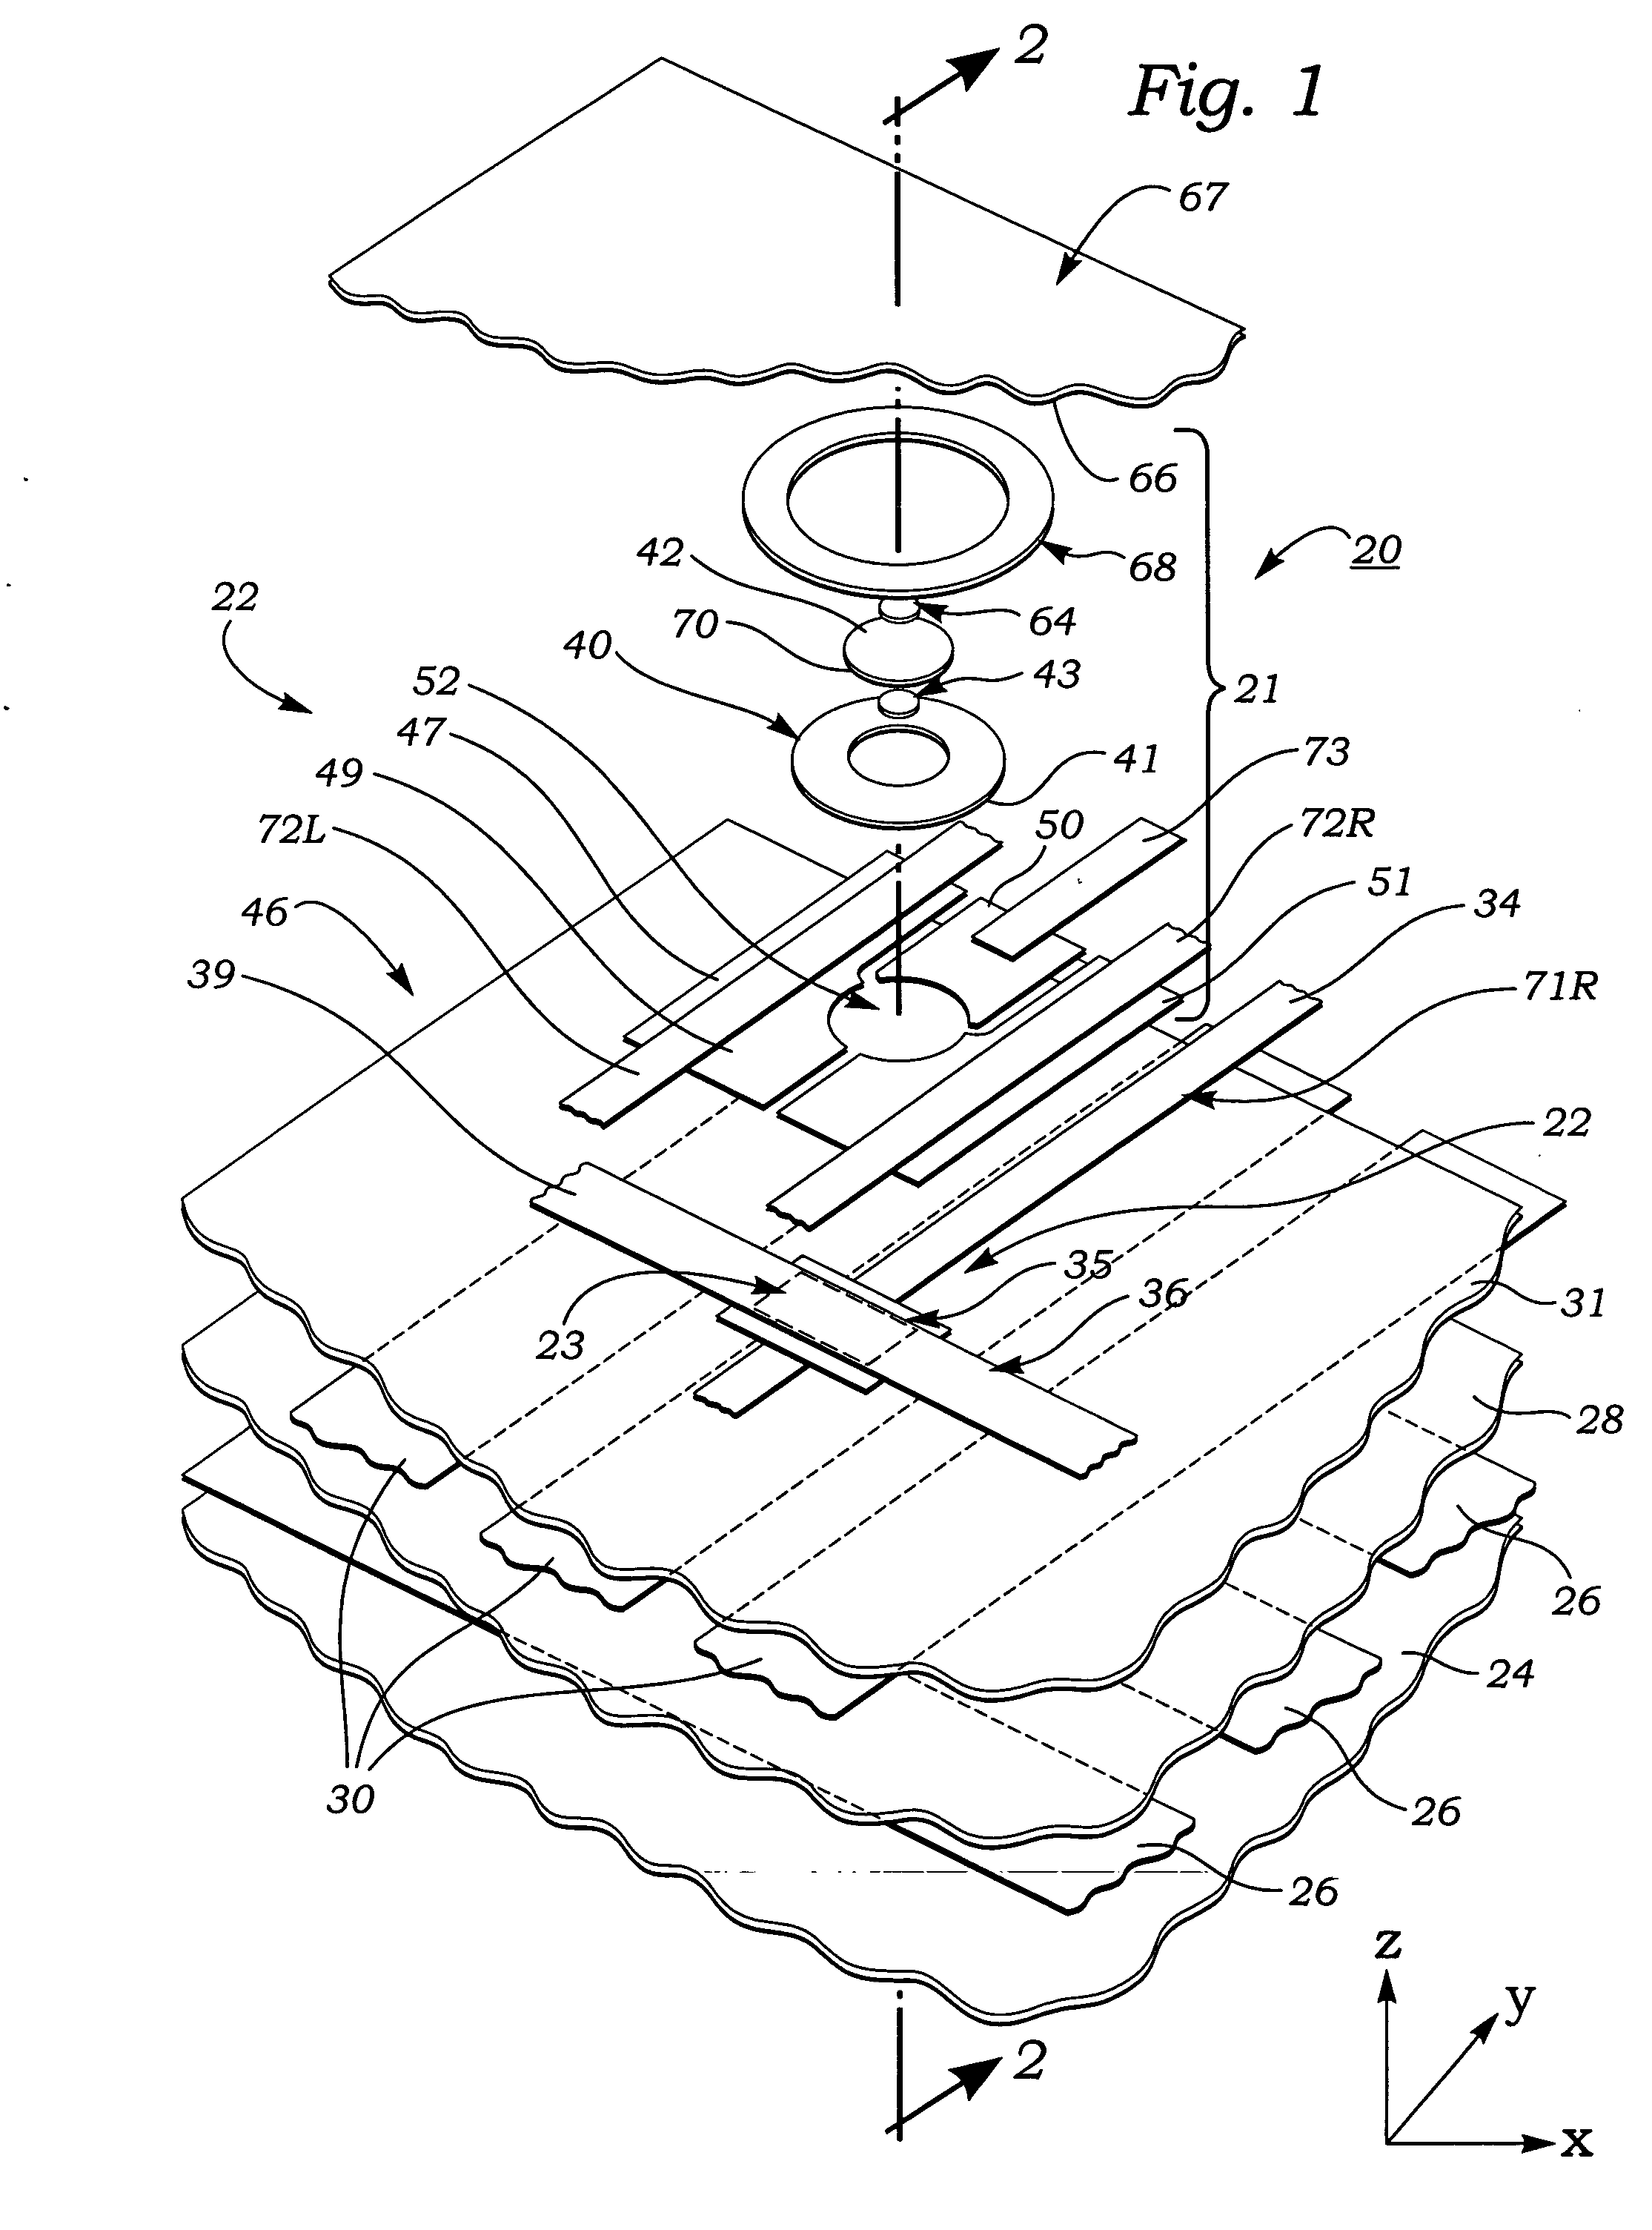 Normal force gradient/shear force sensors and method of measuring internal biological tissue stress